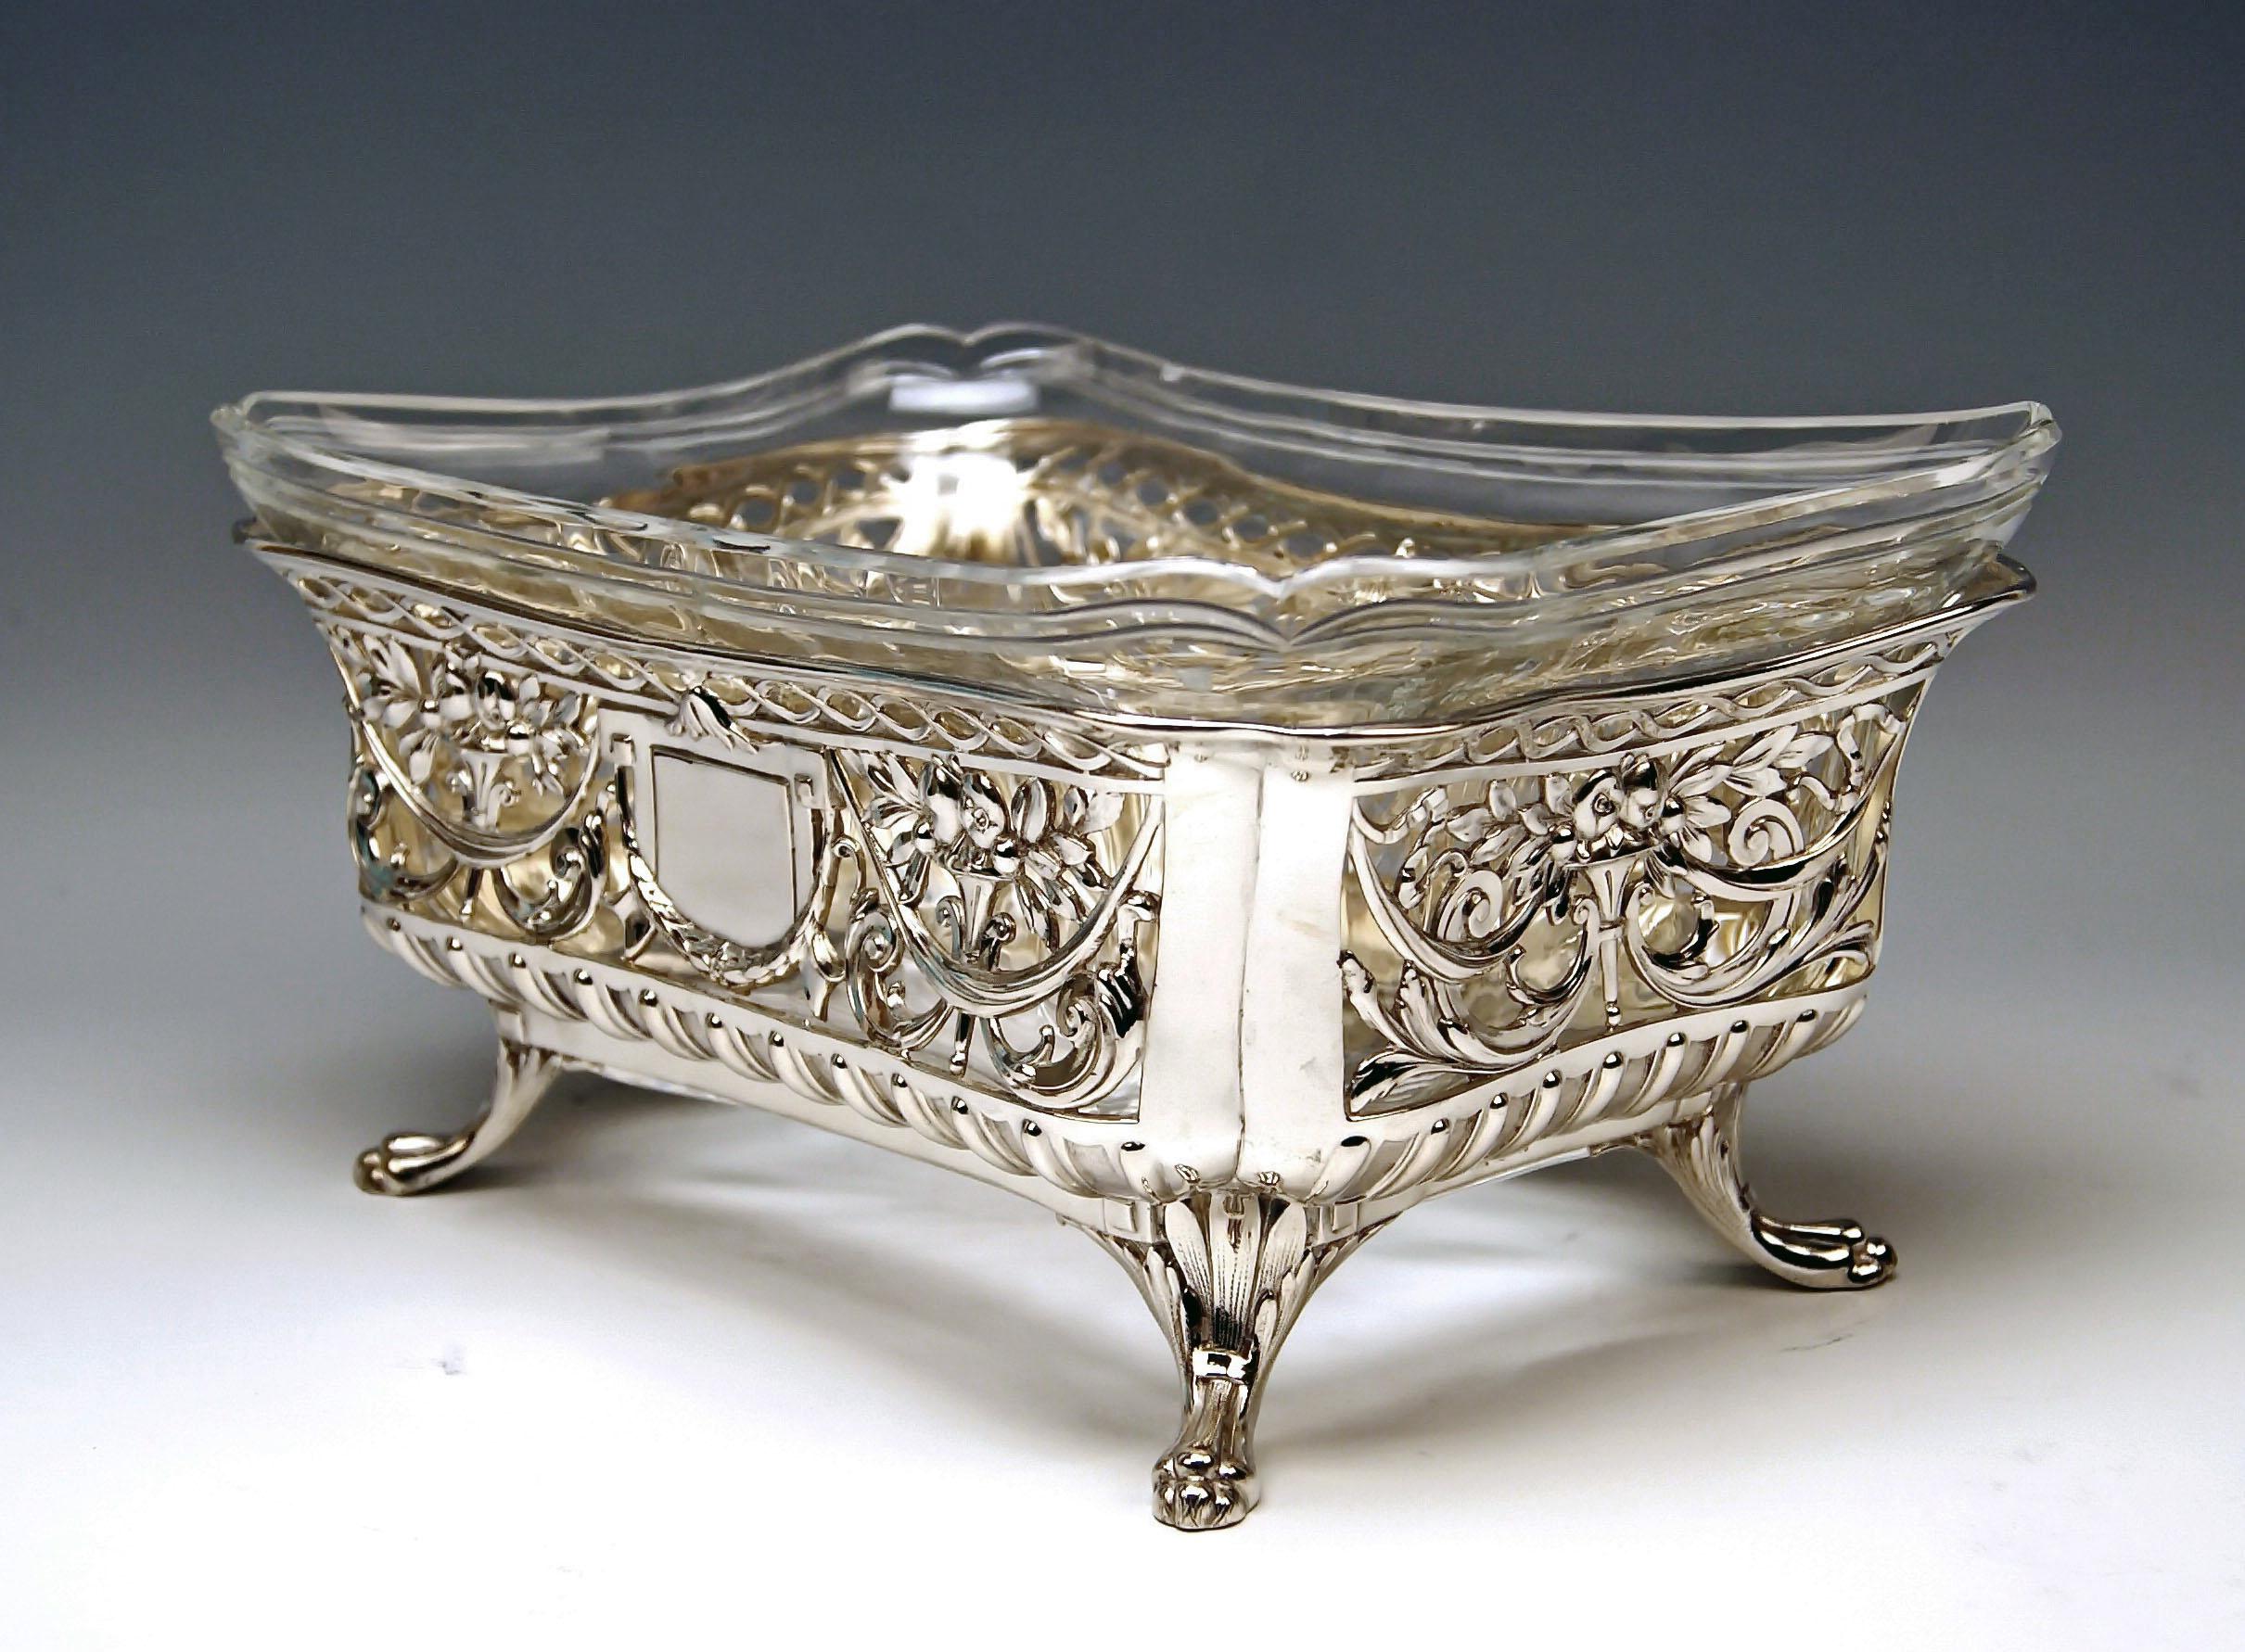 Silver nicest flower bowl / centrepiece with original gorgeous glass liner
Total width: 26.5 cm ( = 10.43 inches)

decorative style / transition to Art Nouveau 
made circa 1900

Hallmarked:
-- SILVER 800
-- branded by German Crescent with